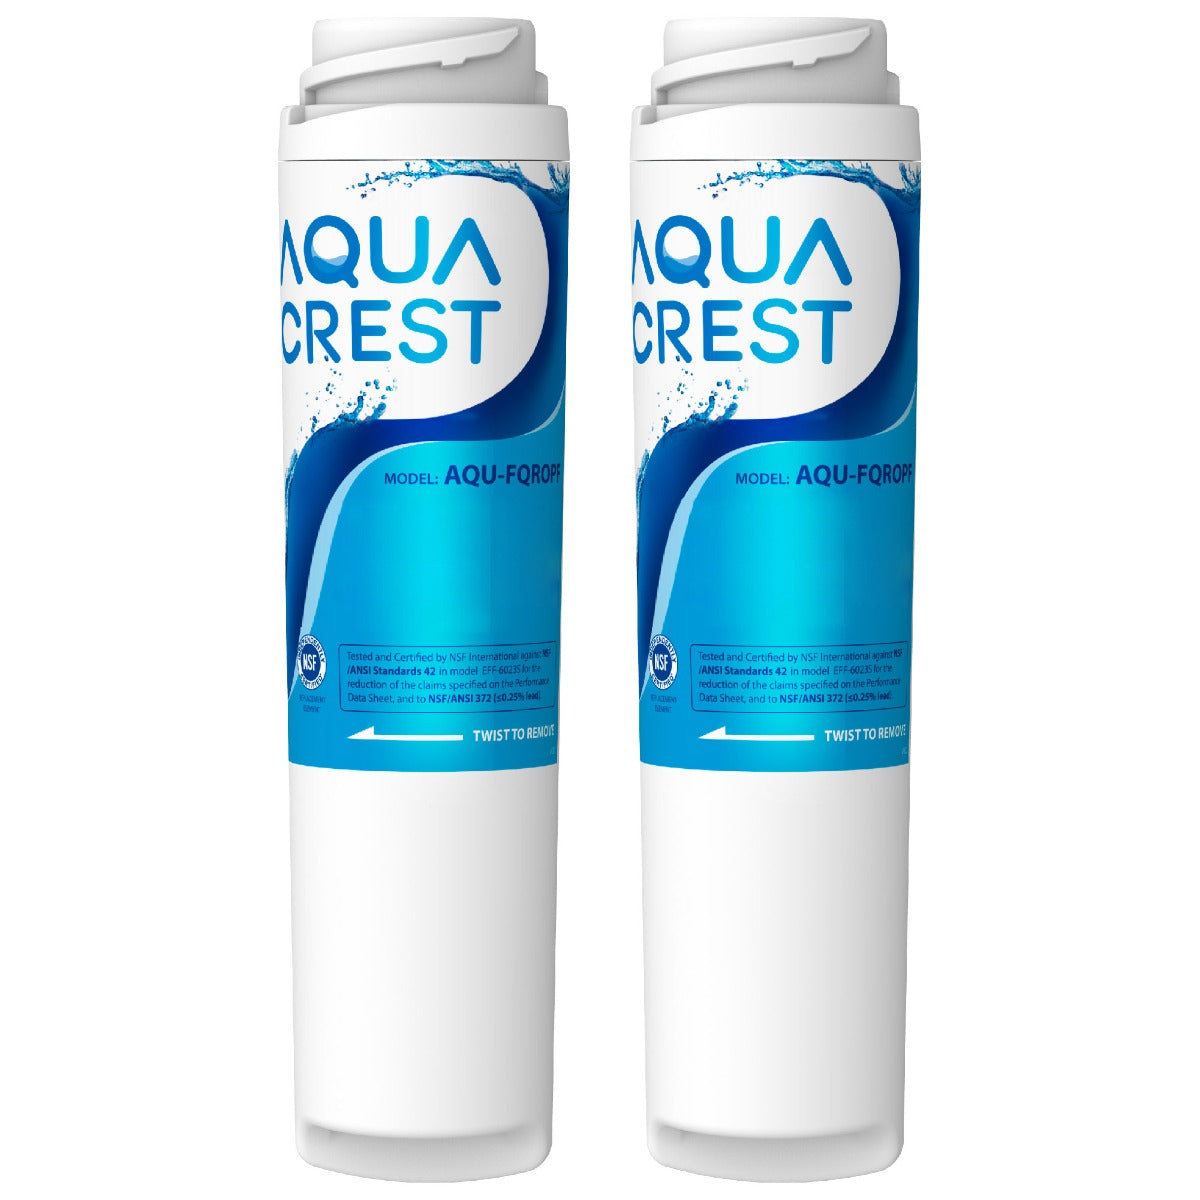 AQUACREST UnderSink Water Filter Replacement for GE® Water Filter FQROPF (Set of 2)